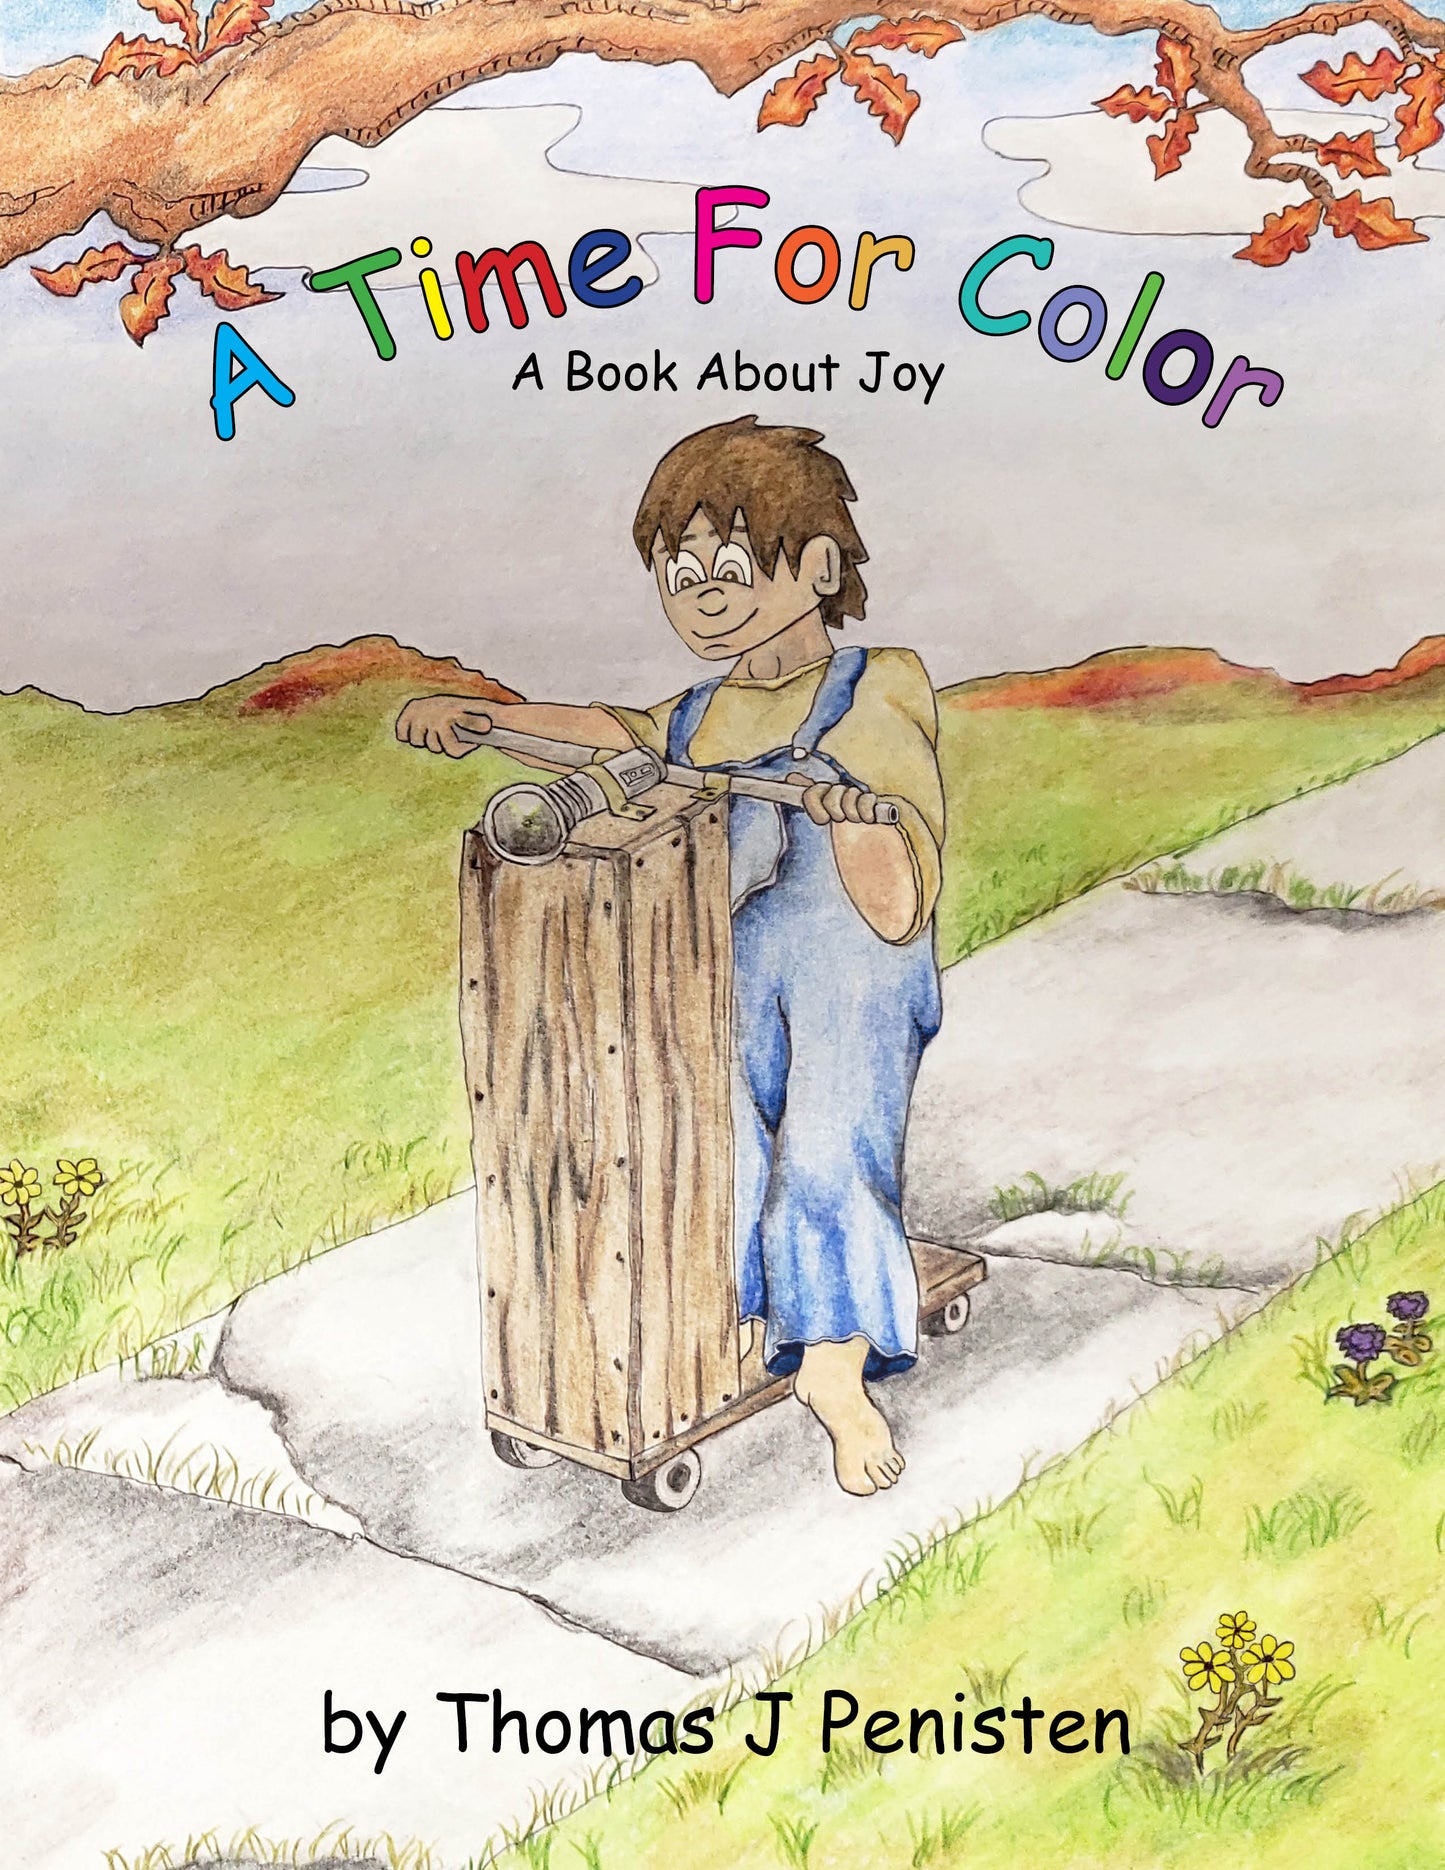 A Time For Color - A Book About JOY (Hardcover)